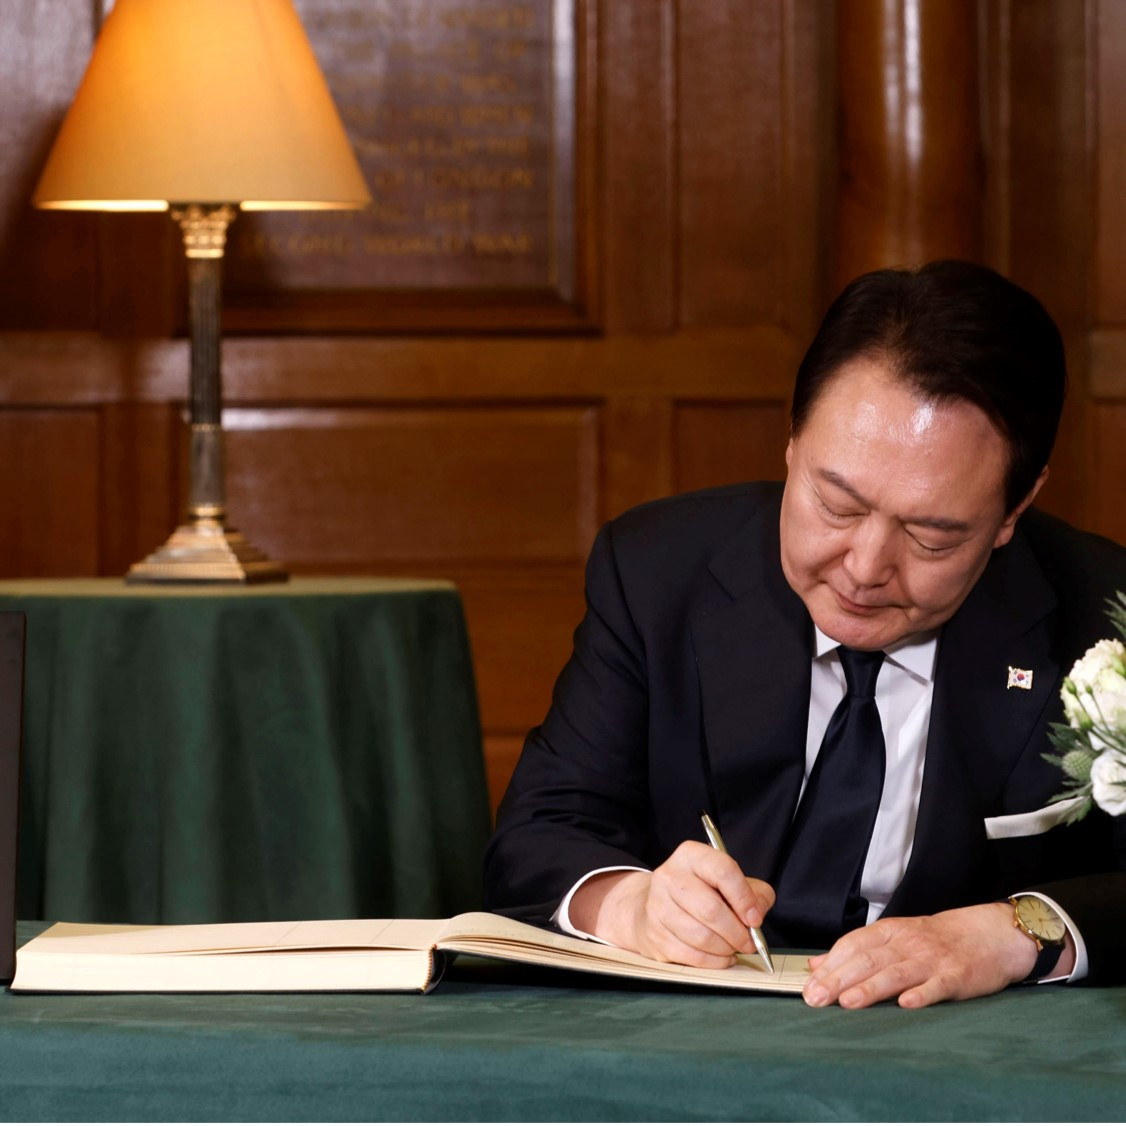 President Yoon Suk-yeol signs a condolence book for the queen at Church House. He wrote, 